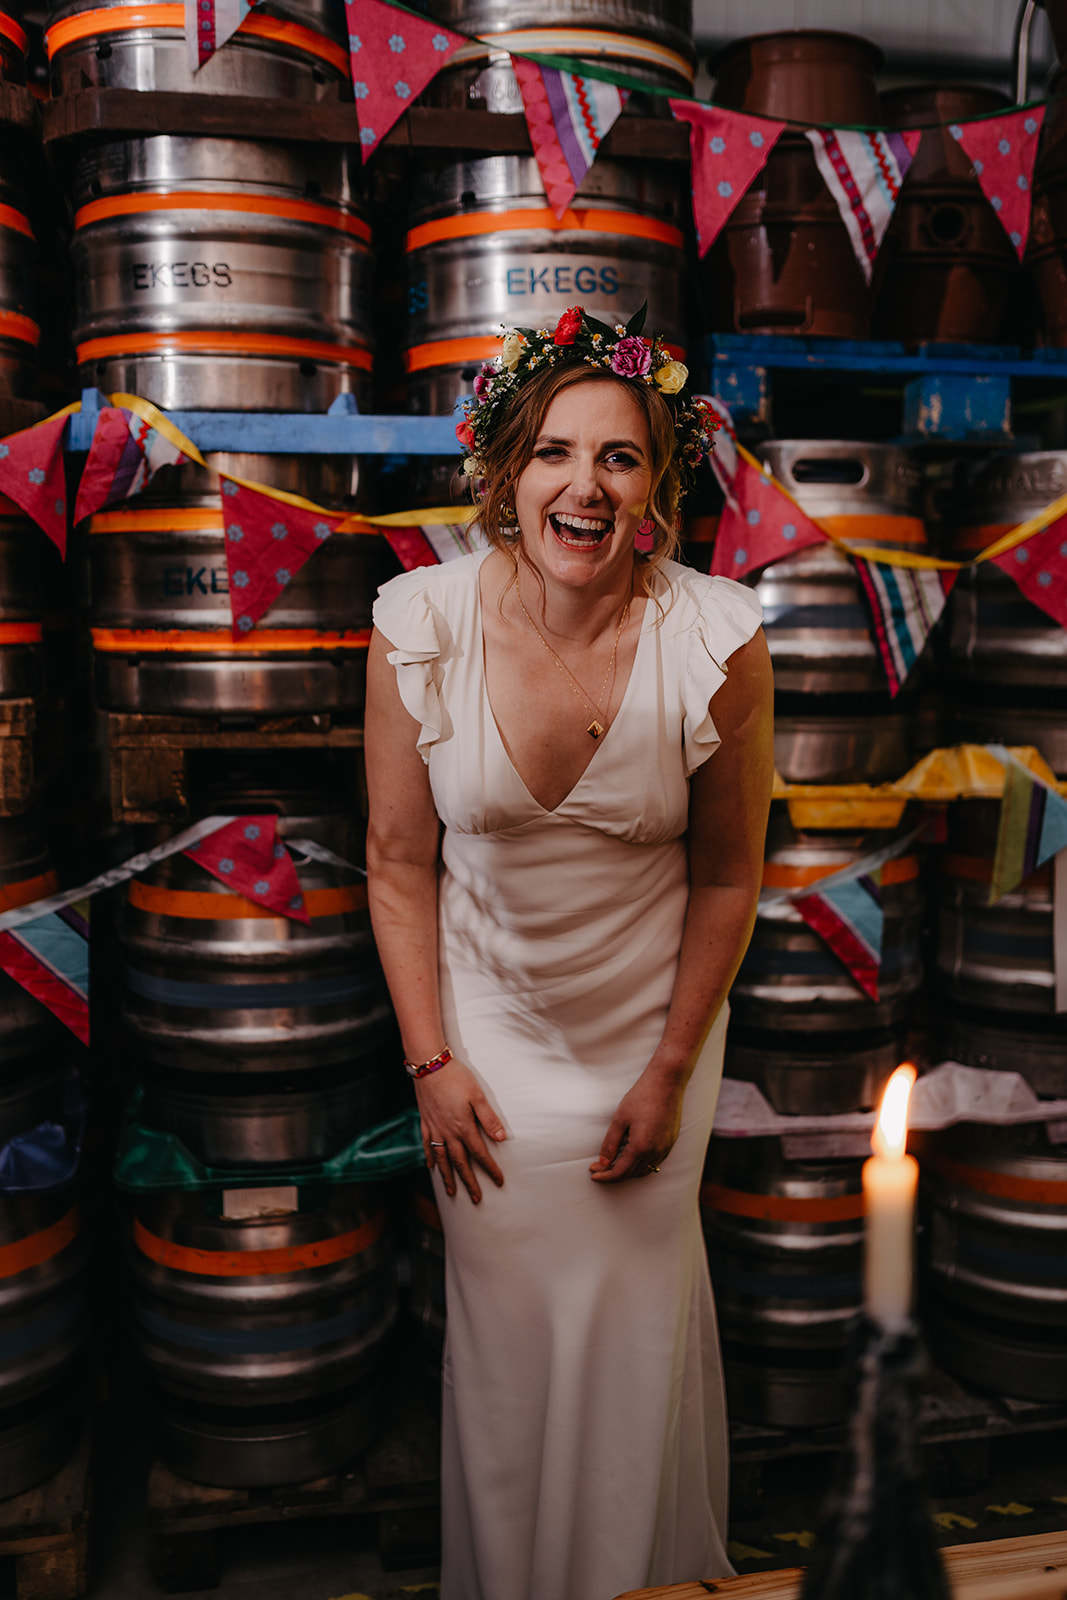 Bride laughs surrounded by kegs at crossborders brewery taproom wedding reception